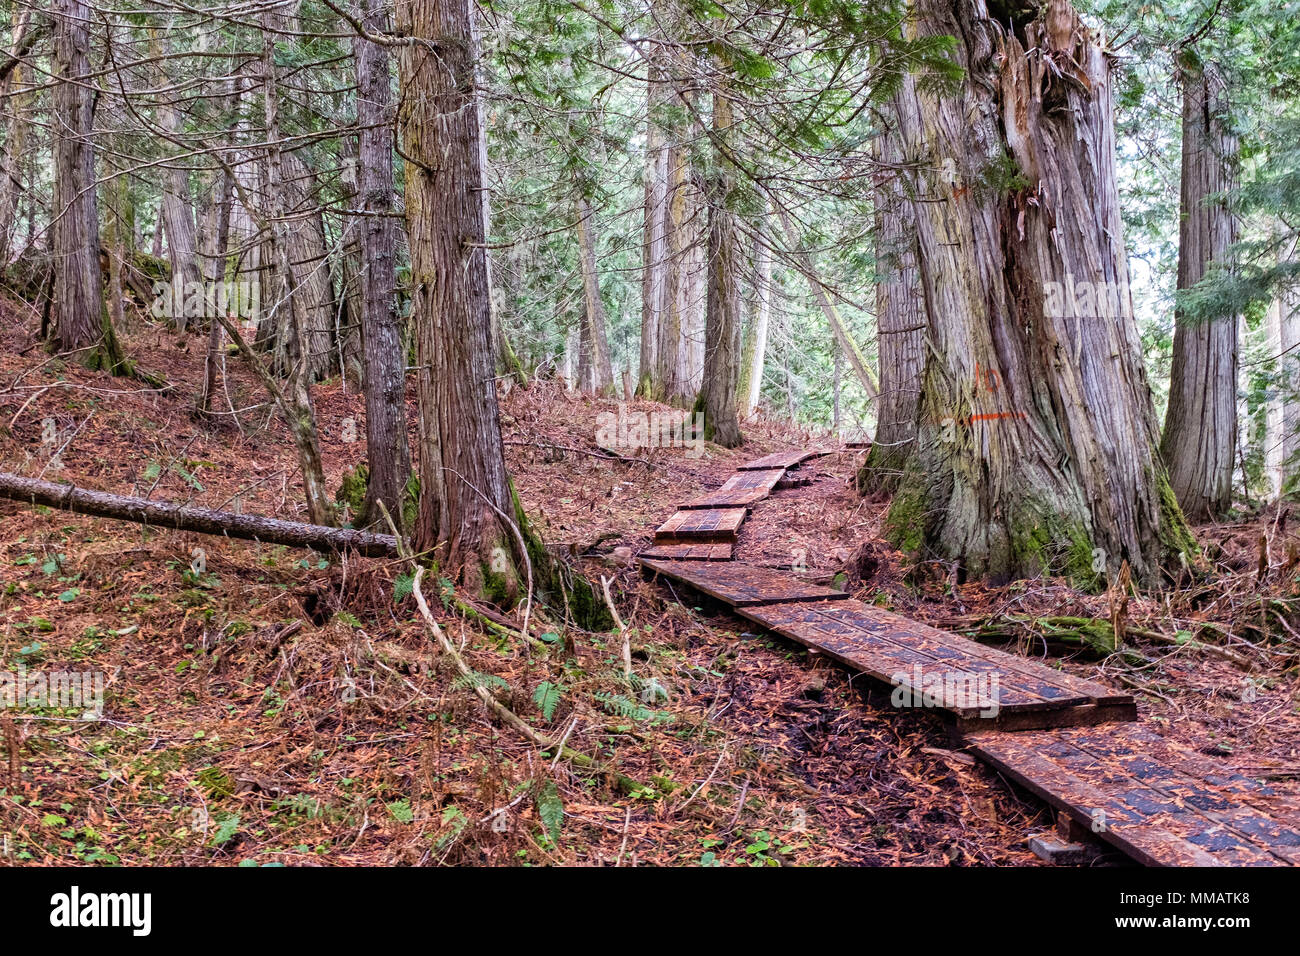 The trail winding through the ancient forest in central British Columbia Stock Photo